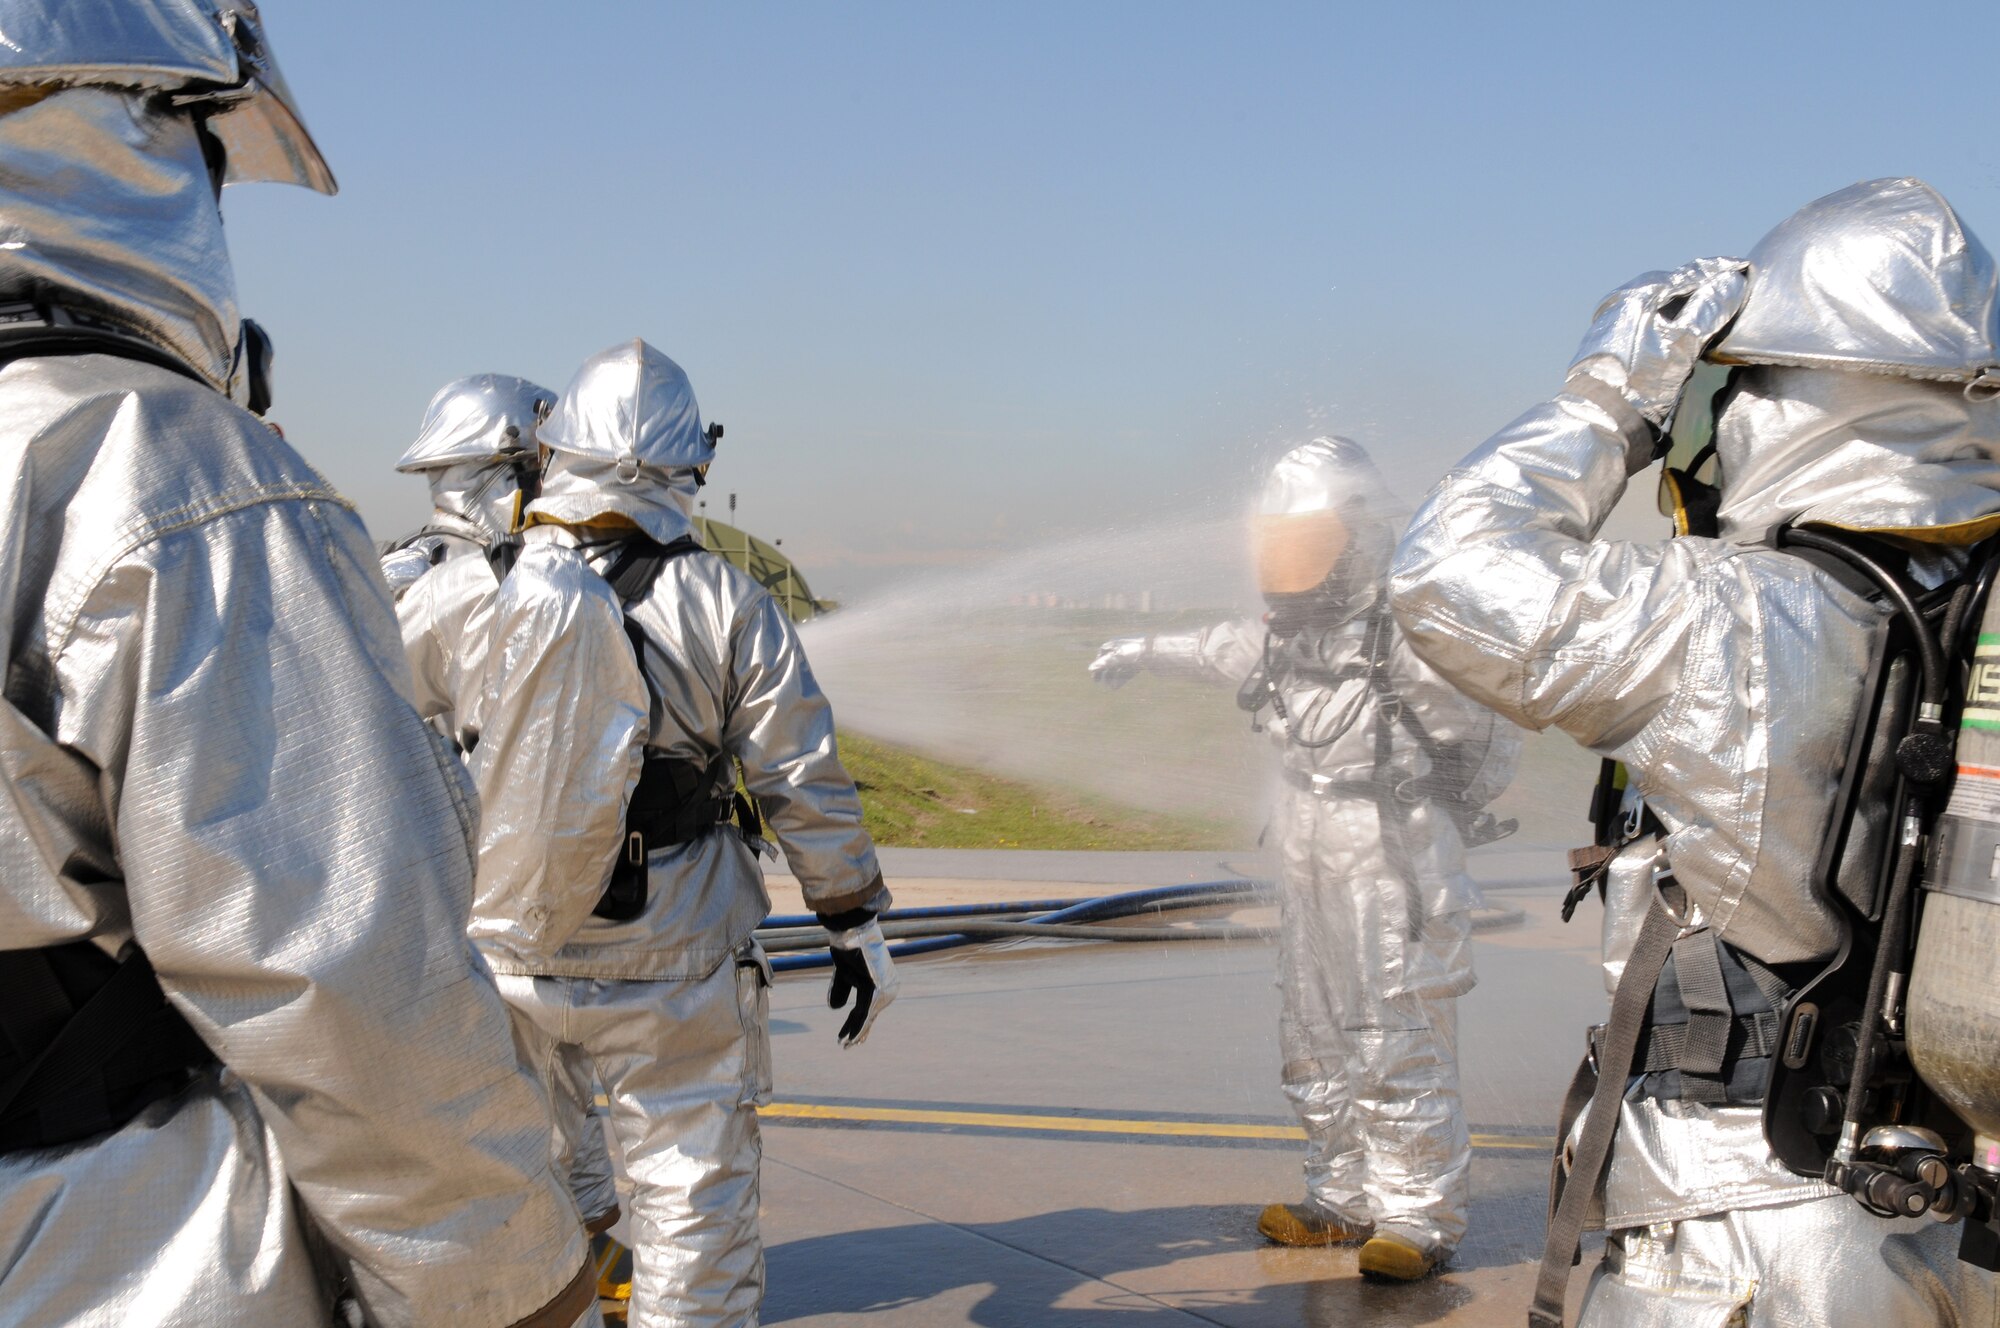 Incirlik firefighters hose each other off after completing an exercise Monday, March 1, 2010 at Incirlik Air Base, Turkey.  Firefighters do this is to ensure all simulated contaminants are removed from their suits before removing their gear.  (U.S. Air Force photo/Senior Airman Ashley Wood)